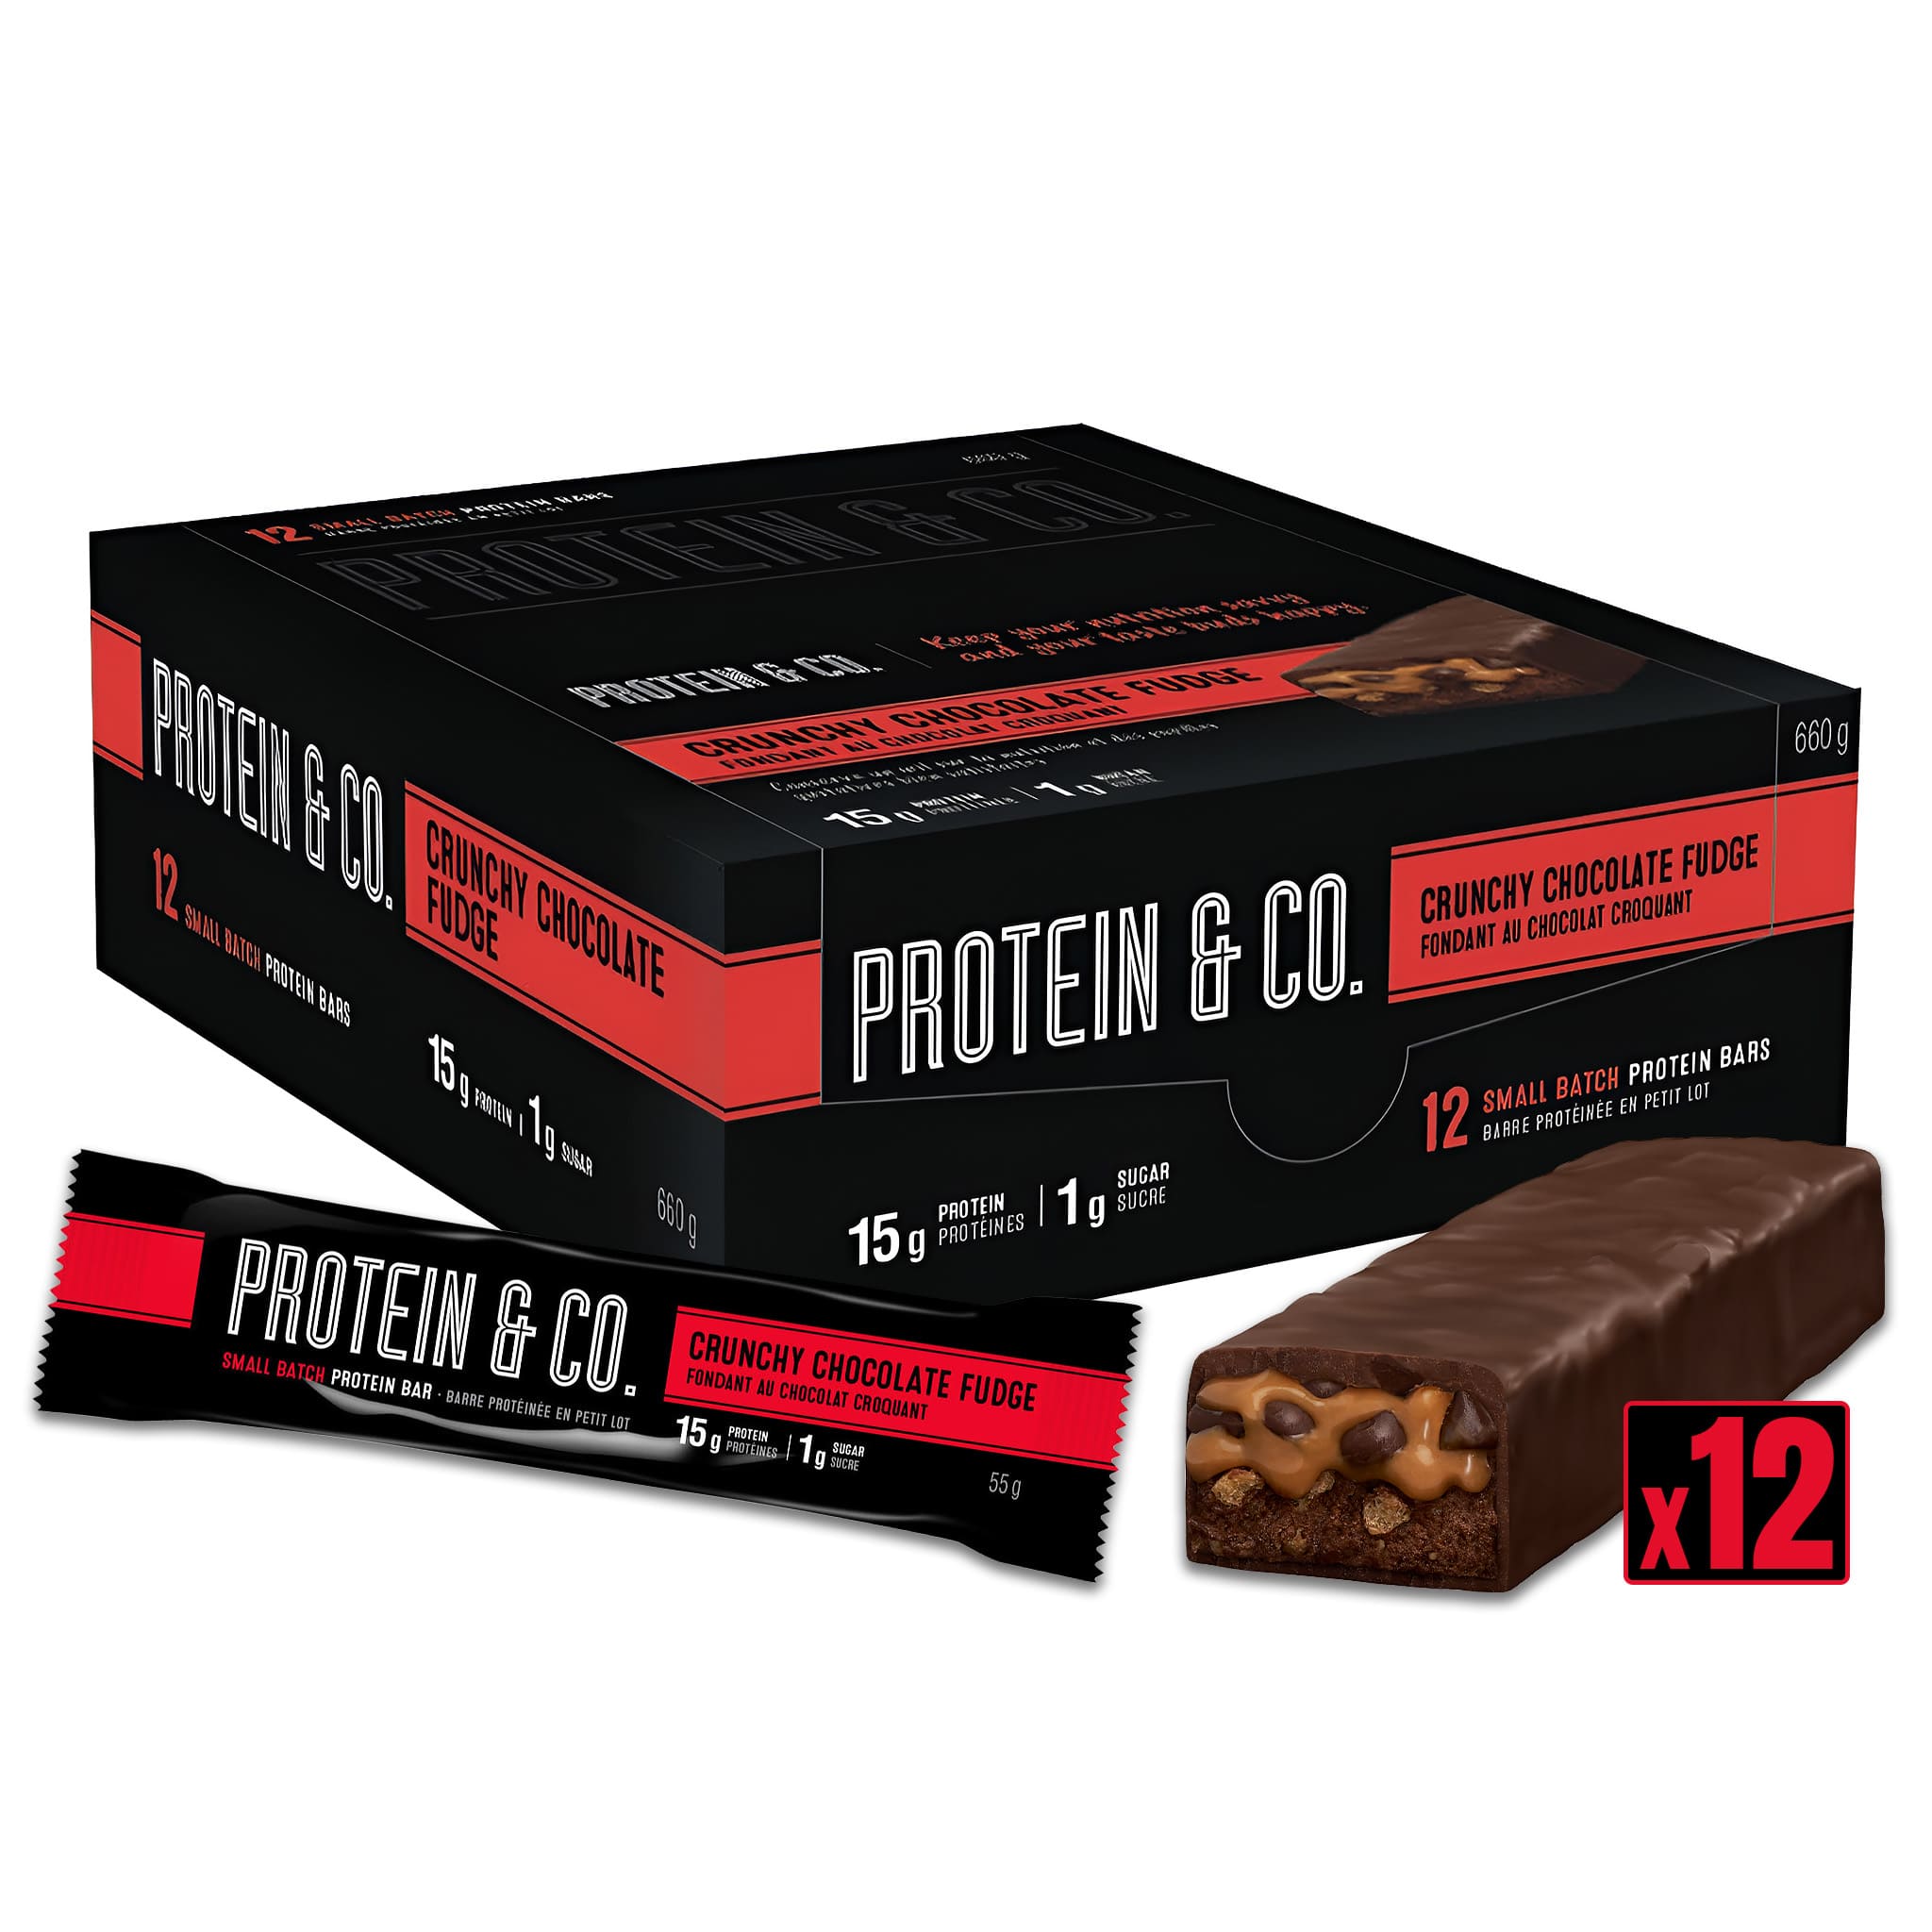 Protein & Co.